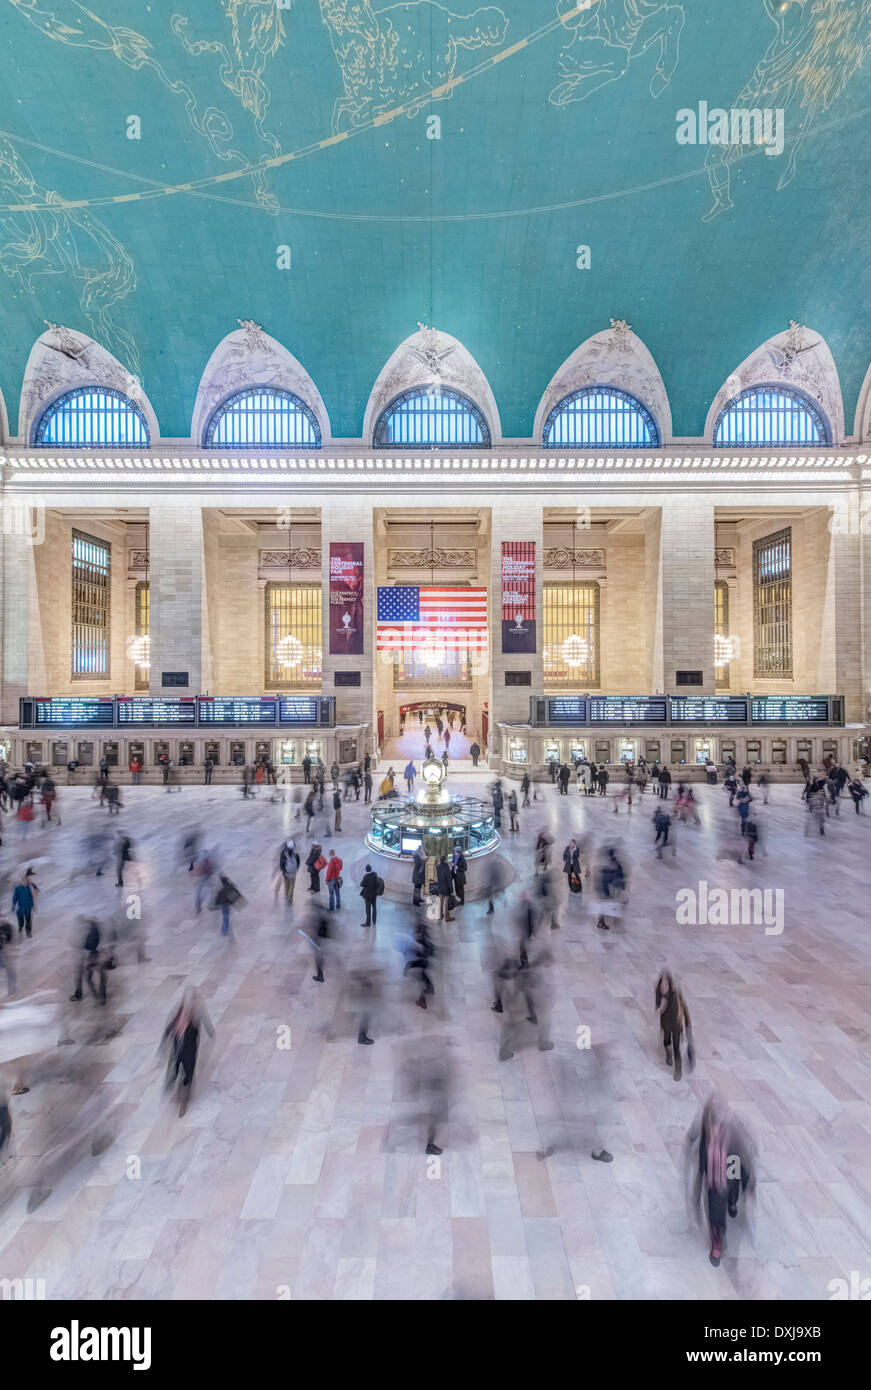 Blurred people walking outside Grand Central Terminal, New York City, New York, United States, Stock Photo